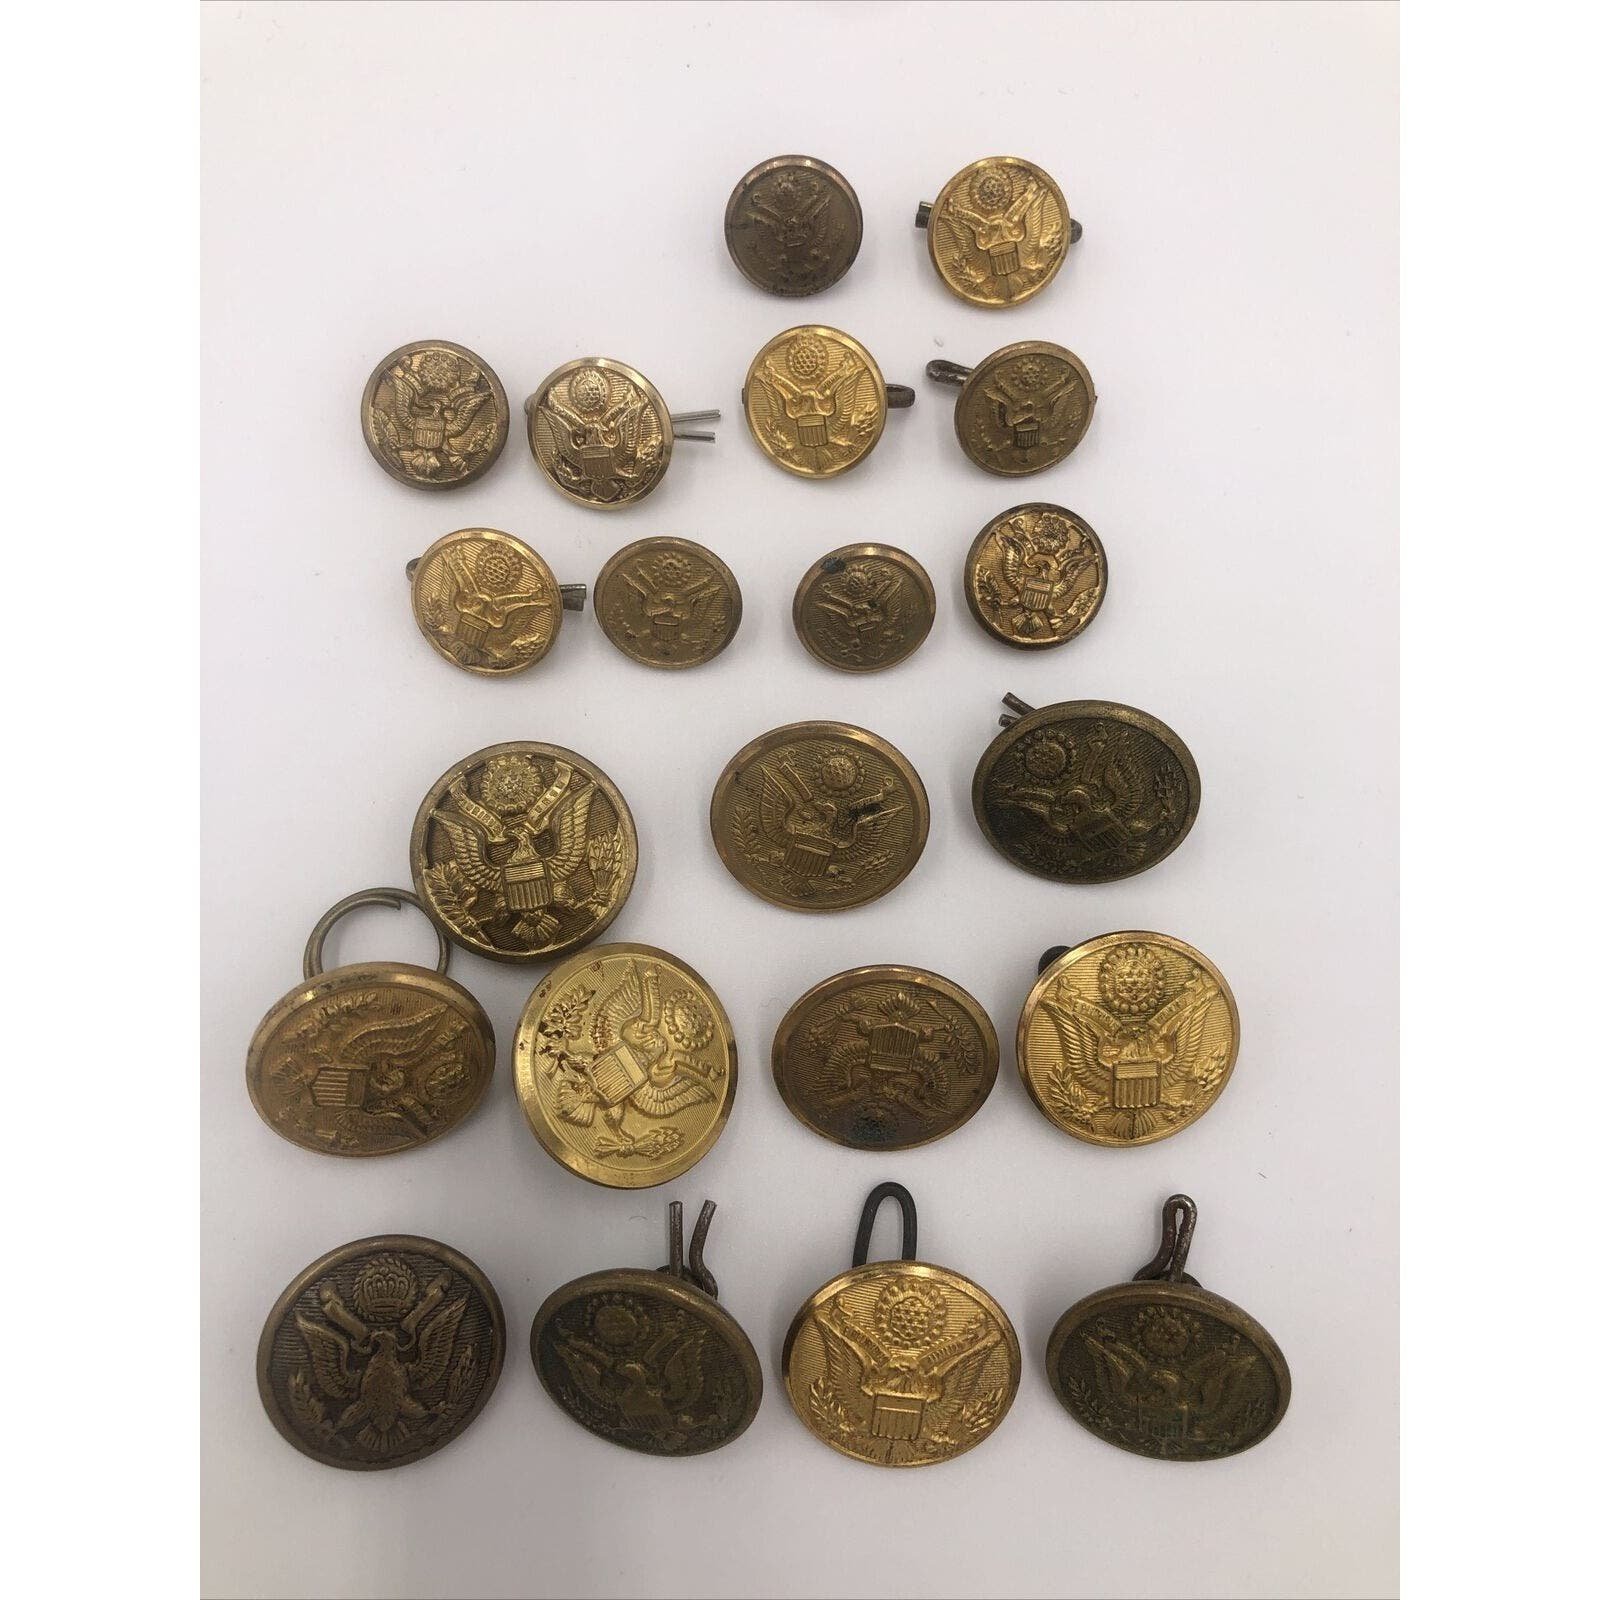 United States Navy Eagle Anchor Brass Coat Shirt Buttons Lot 21 Total Vintage HECgEfDnv